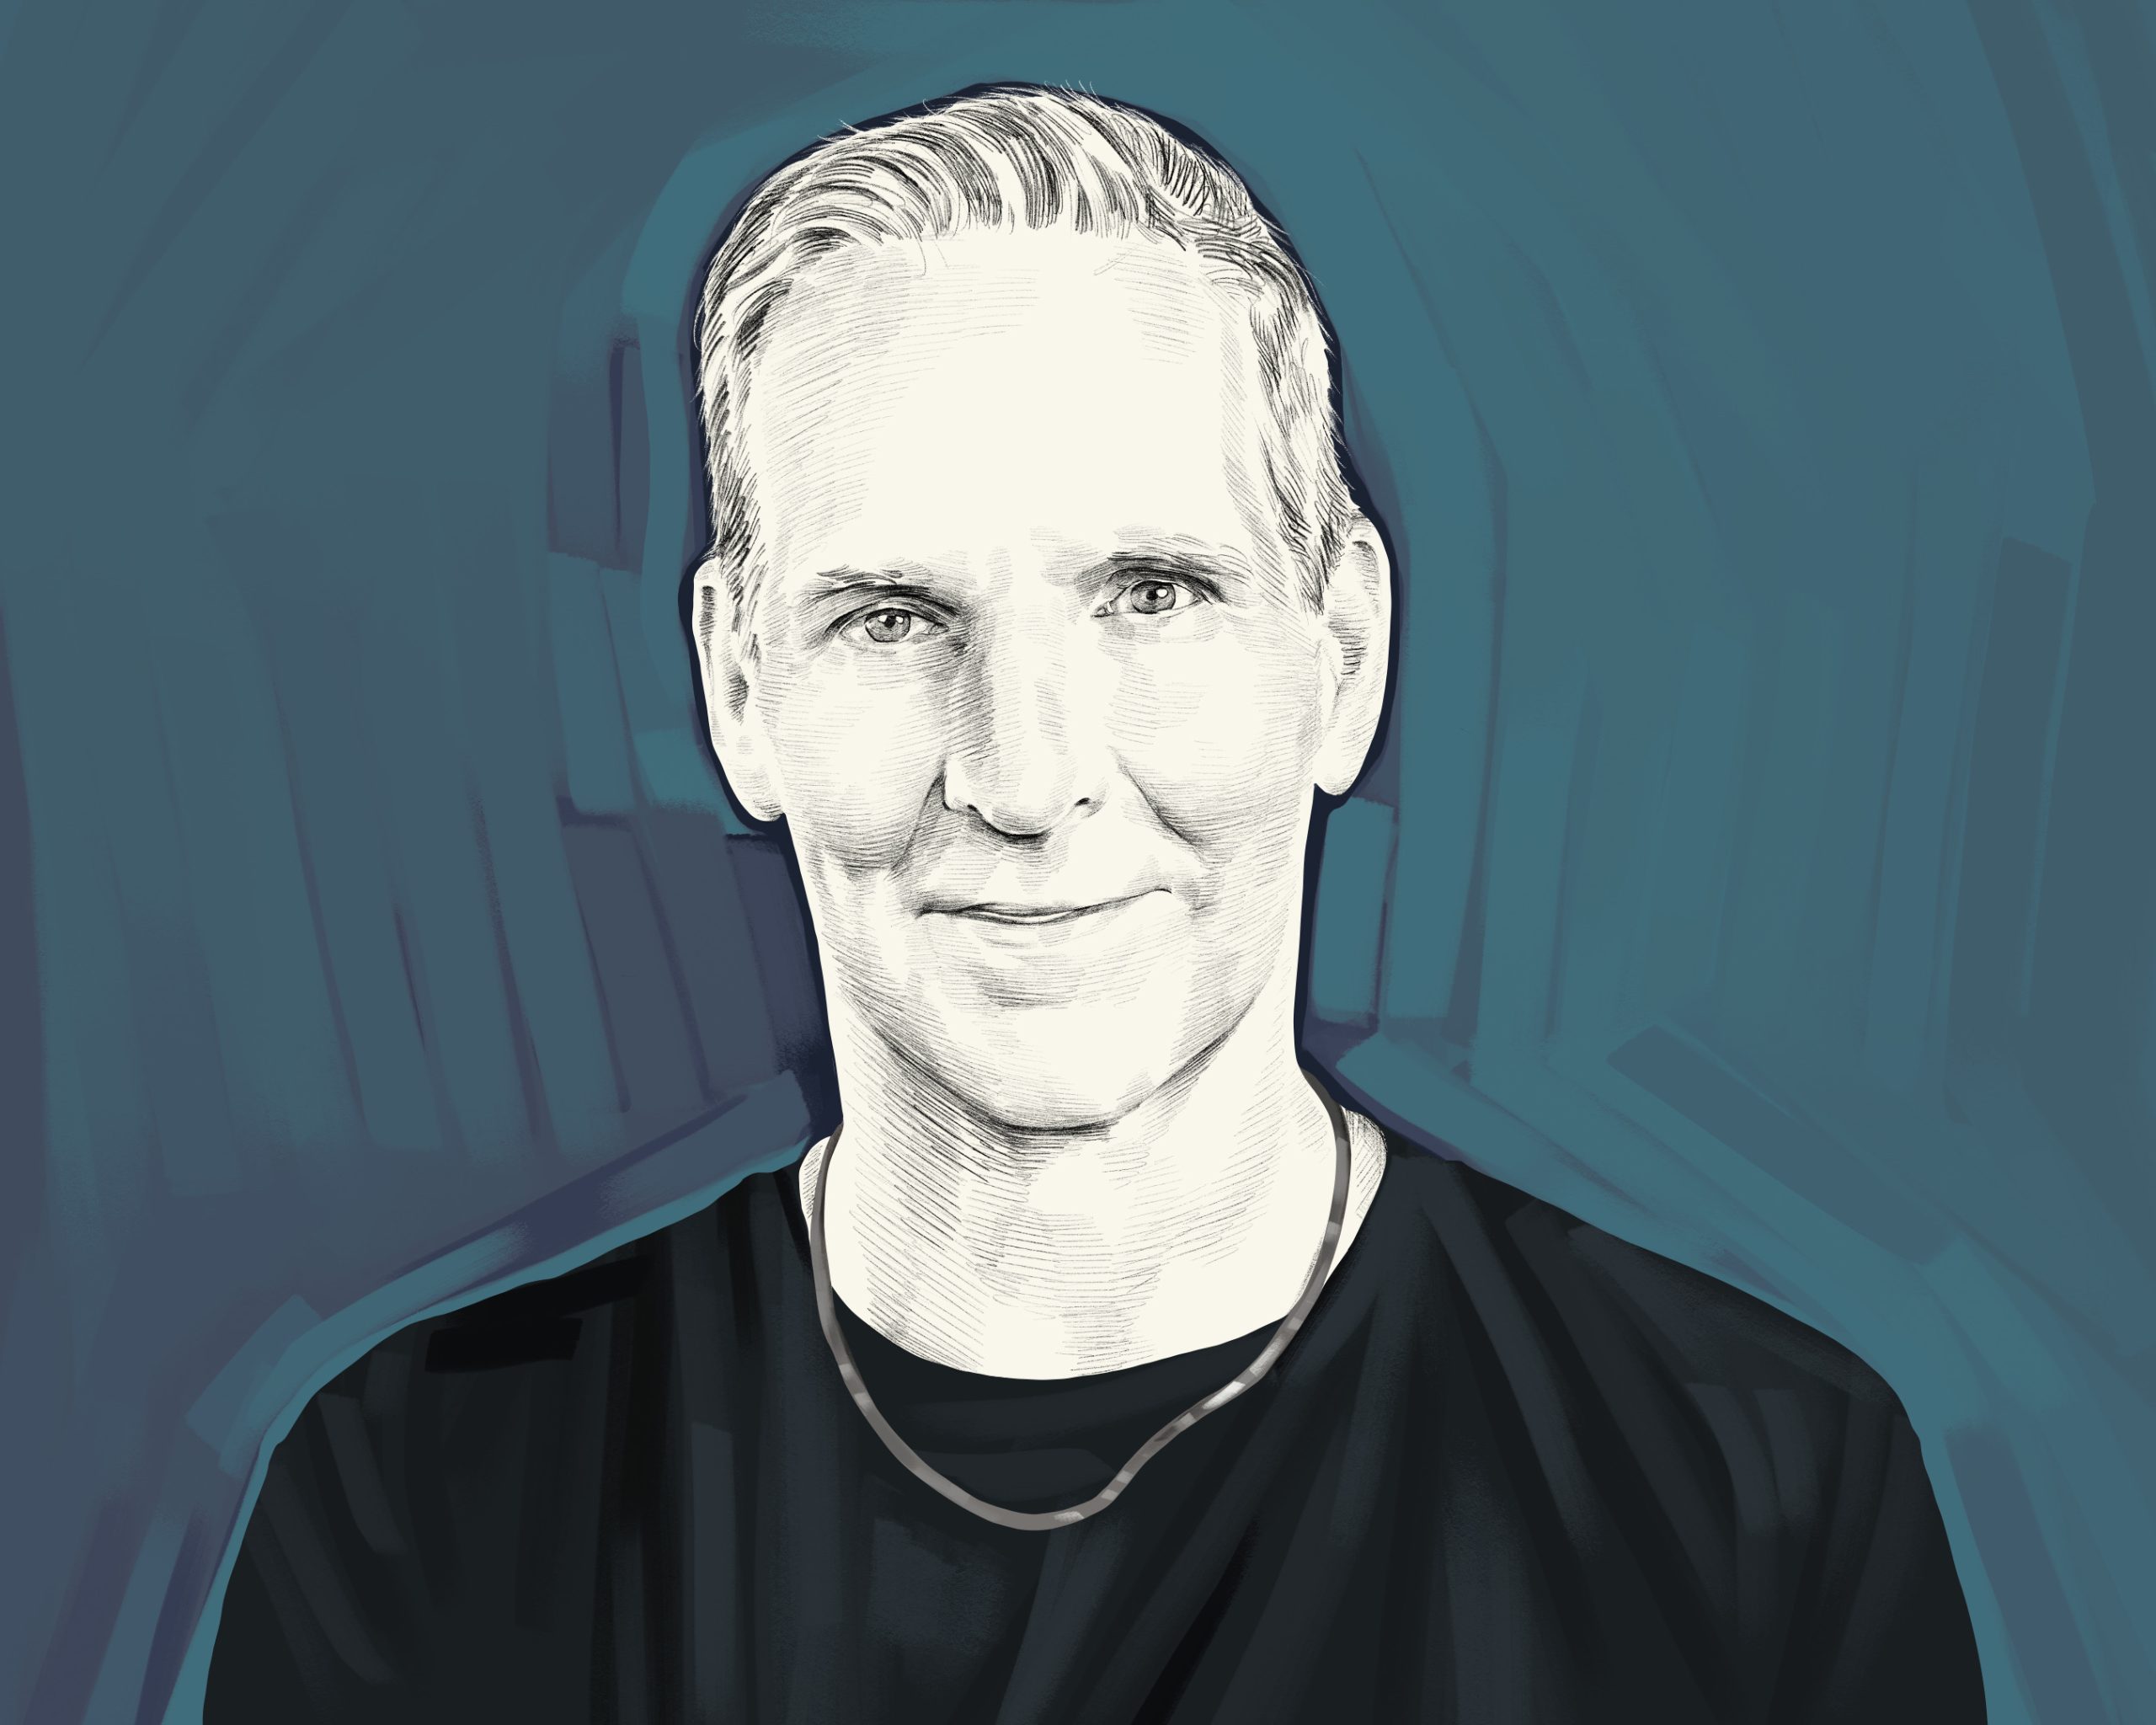 The Tim Ferriss Show Transcripts: Todd McFarlane, Legendary Comic Book  Artist — How to Make Iconic Art, Reinvent Spider-Man, Live Life on Your Own  Terms, and Meet Every Deadline (#639) - The